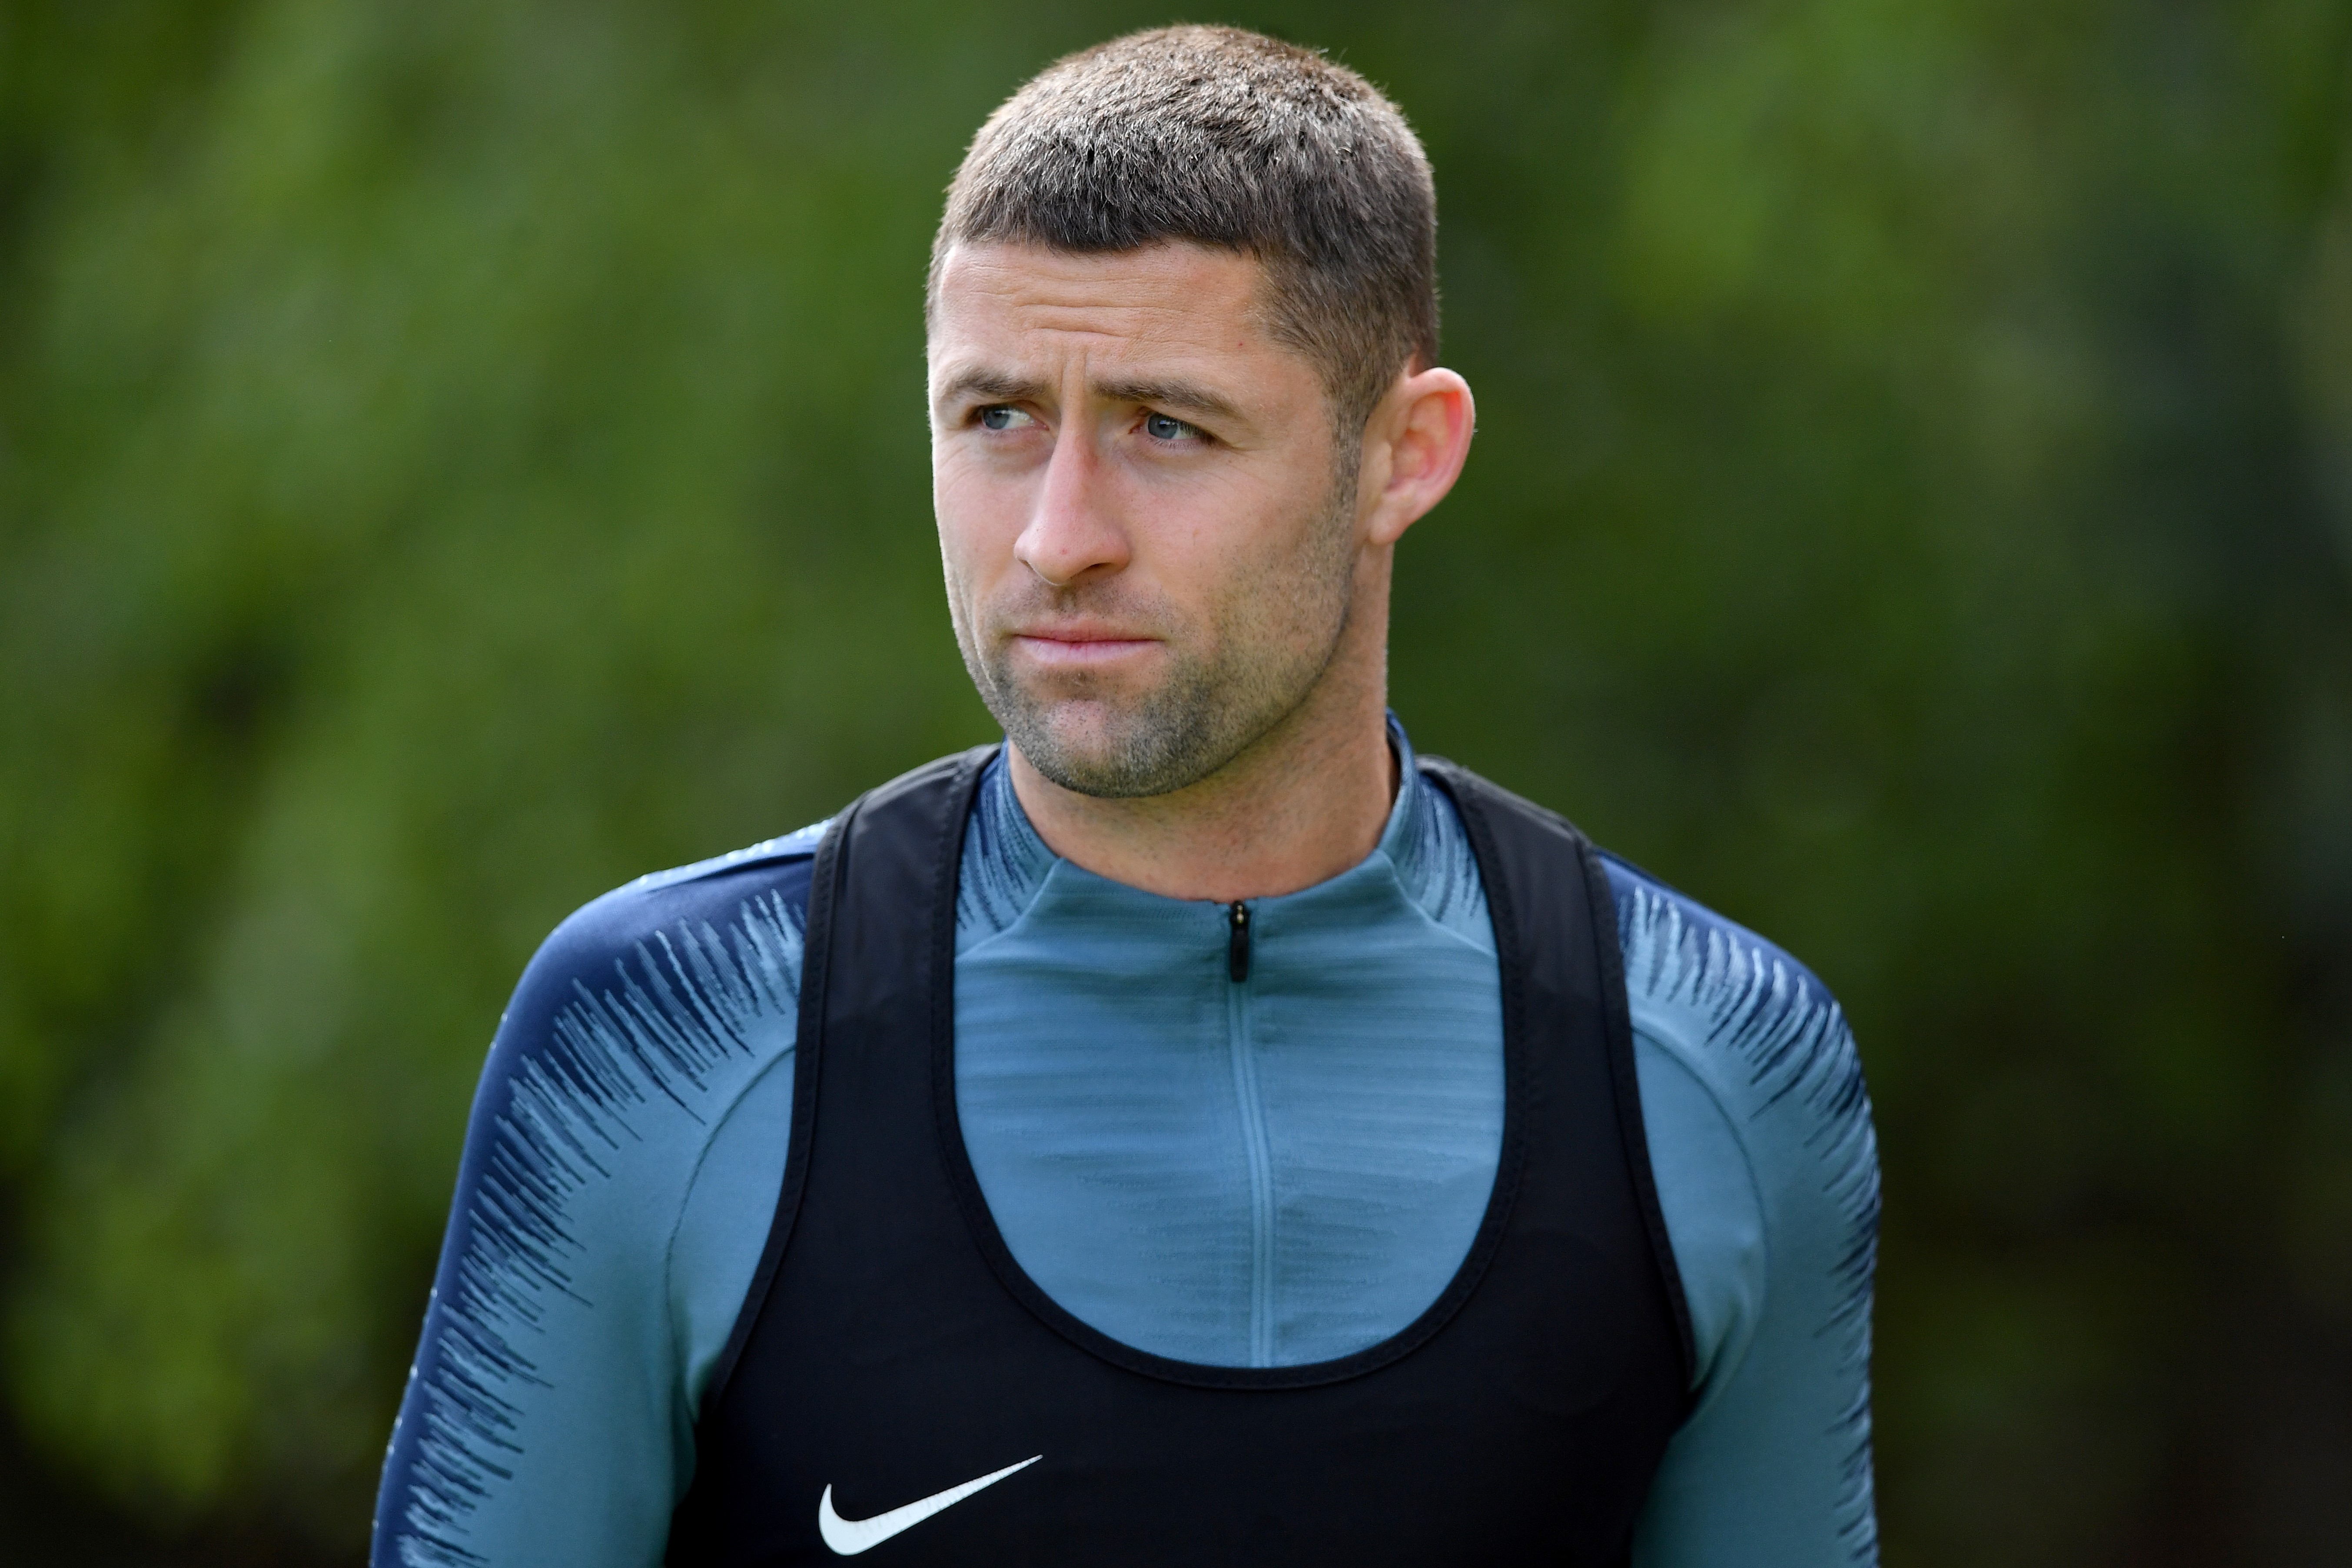 Gary Cahill remains unavailable for Crystal Palace (Photo by BEN STANSALL/AFP/Getty Images)